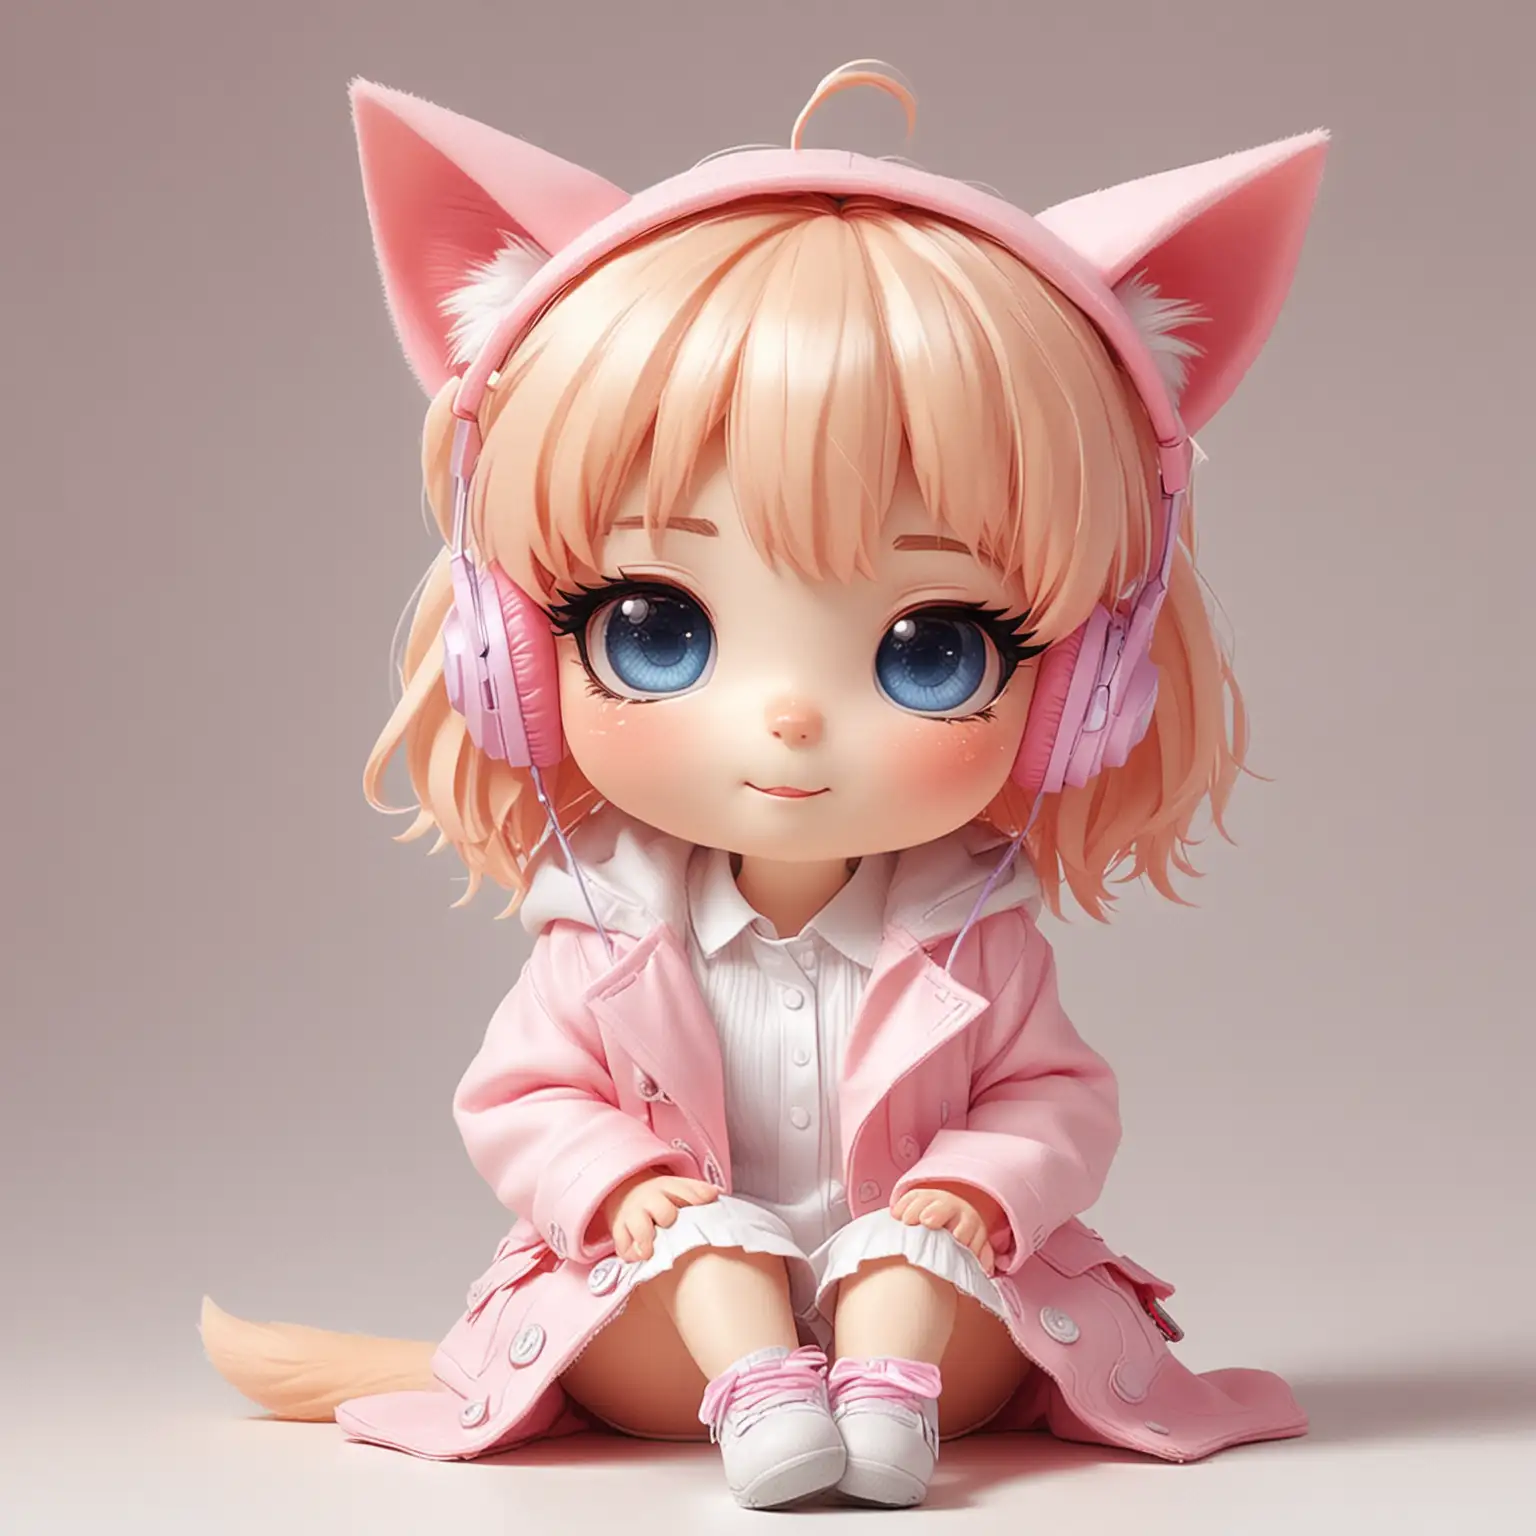 Cute Chibi Girl in Pink Jacket with Cat Ears and Strawberry Hairpin